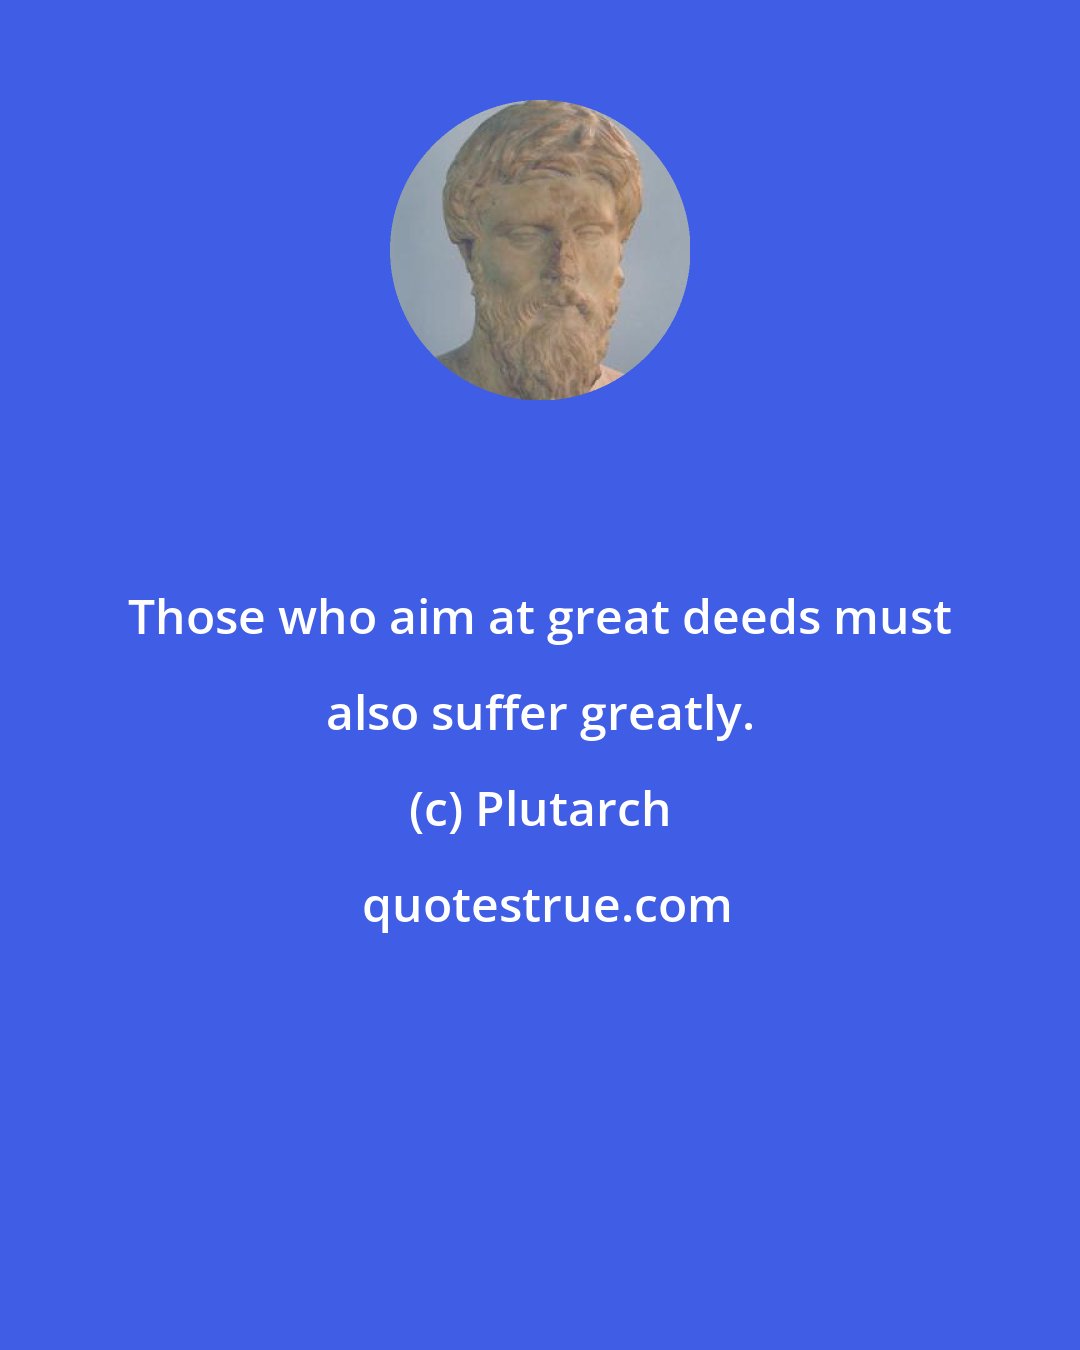 Plutarch: Those who aim at great deeds must also suffer greatly.